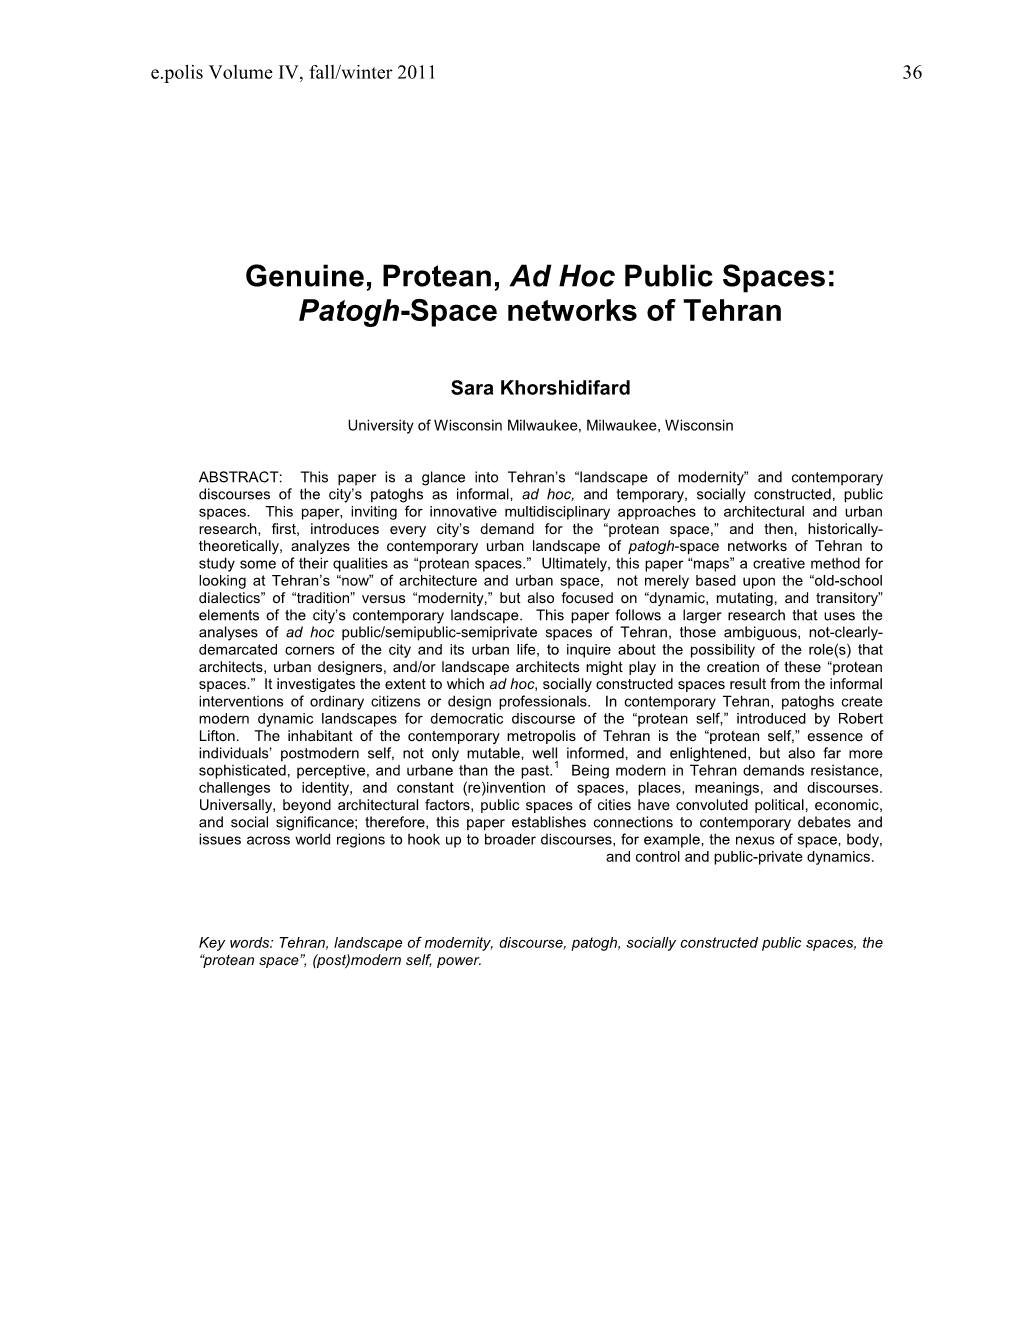 Patogh-Space Networks of Tehran